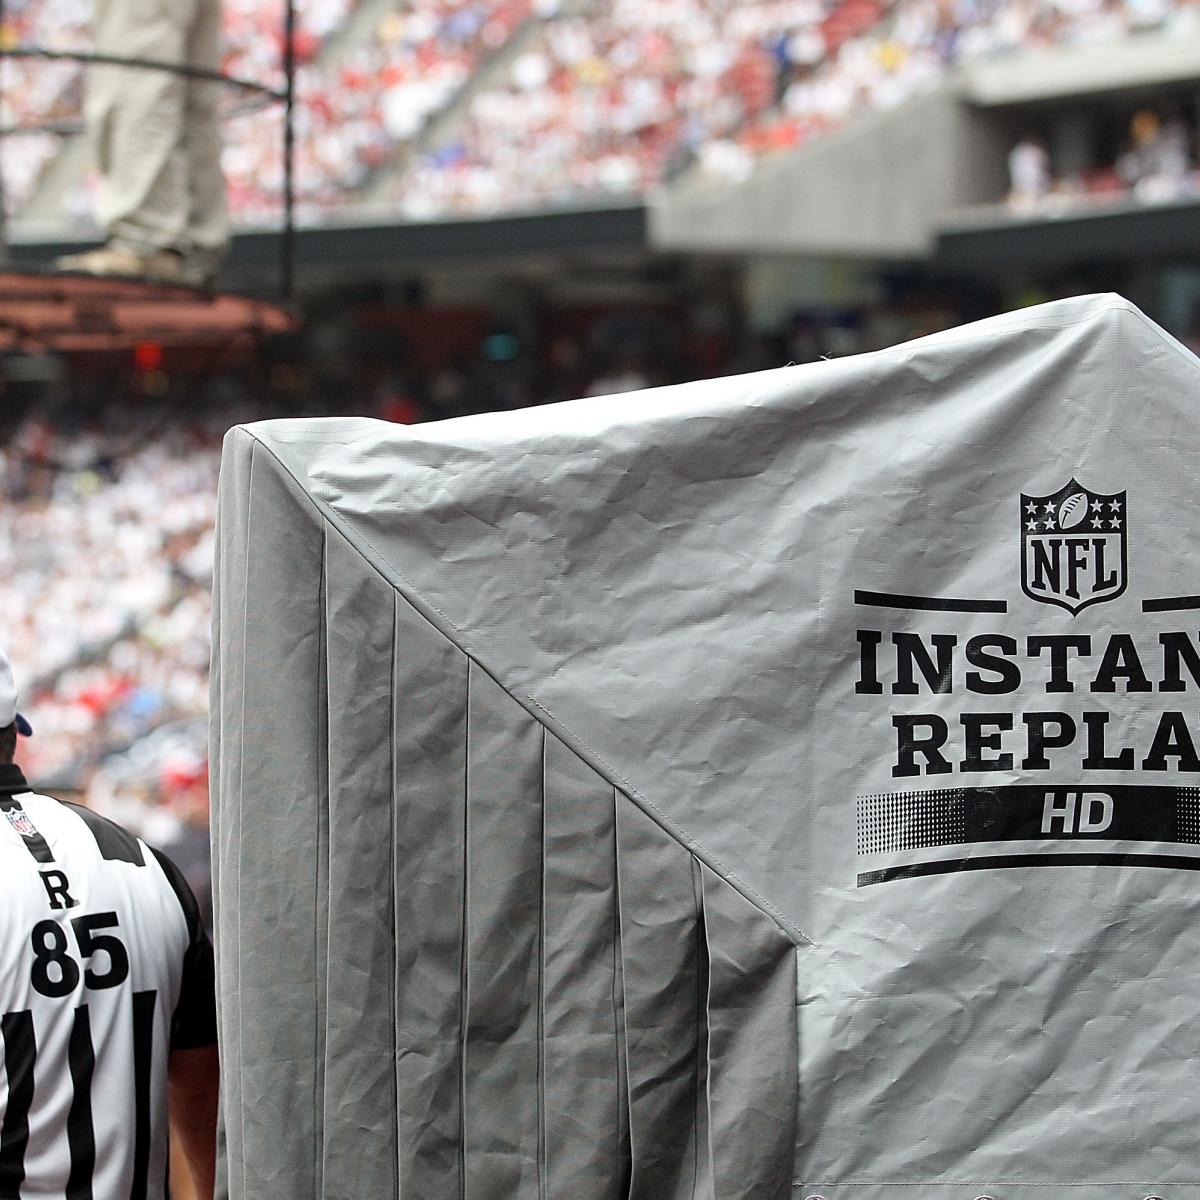 The History of Instant Replay in the NFL